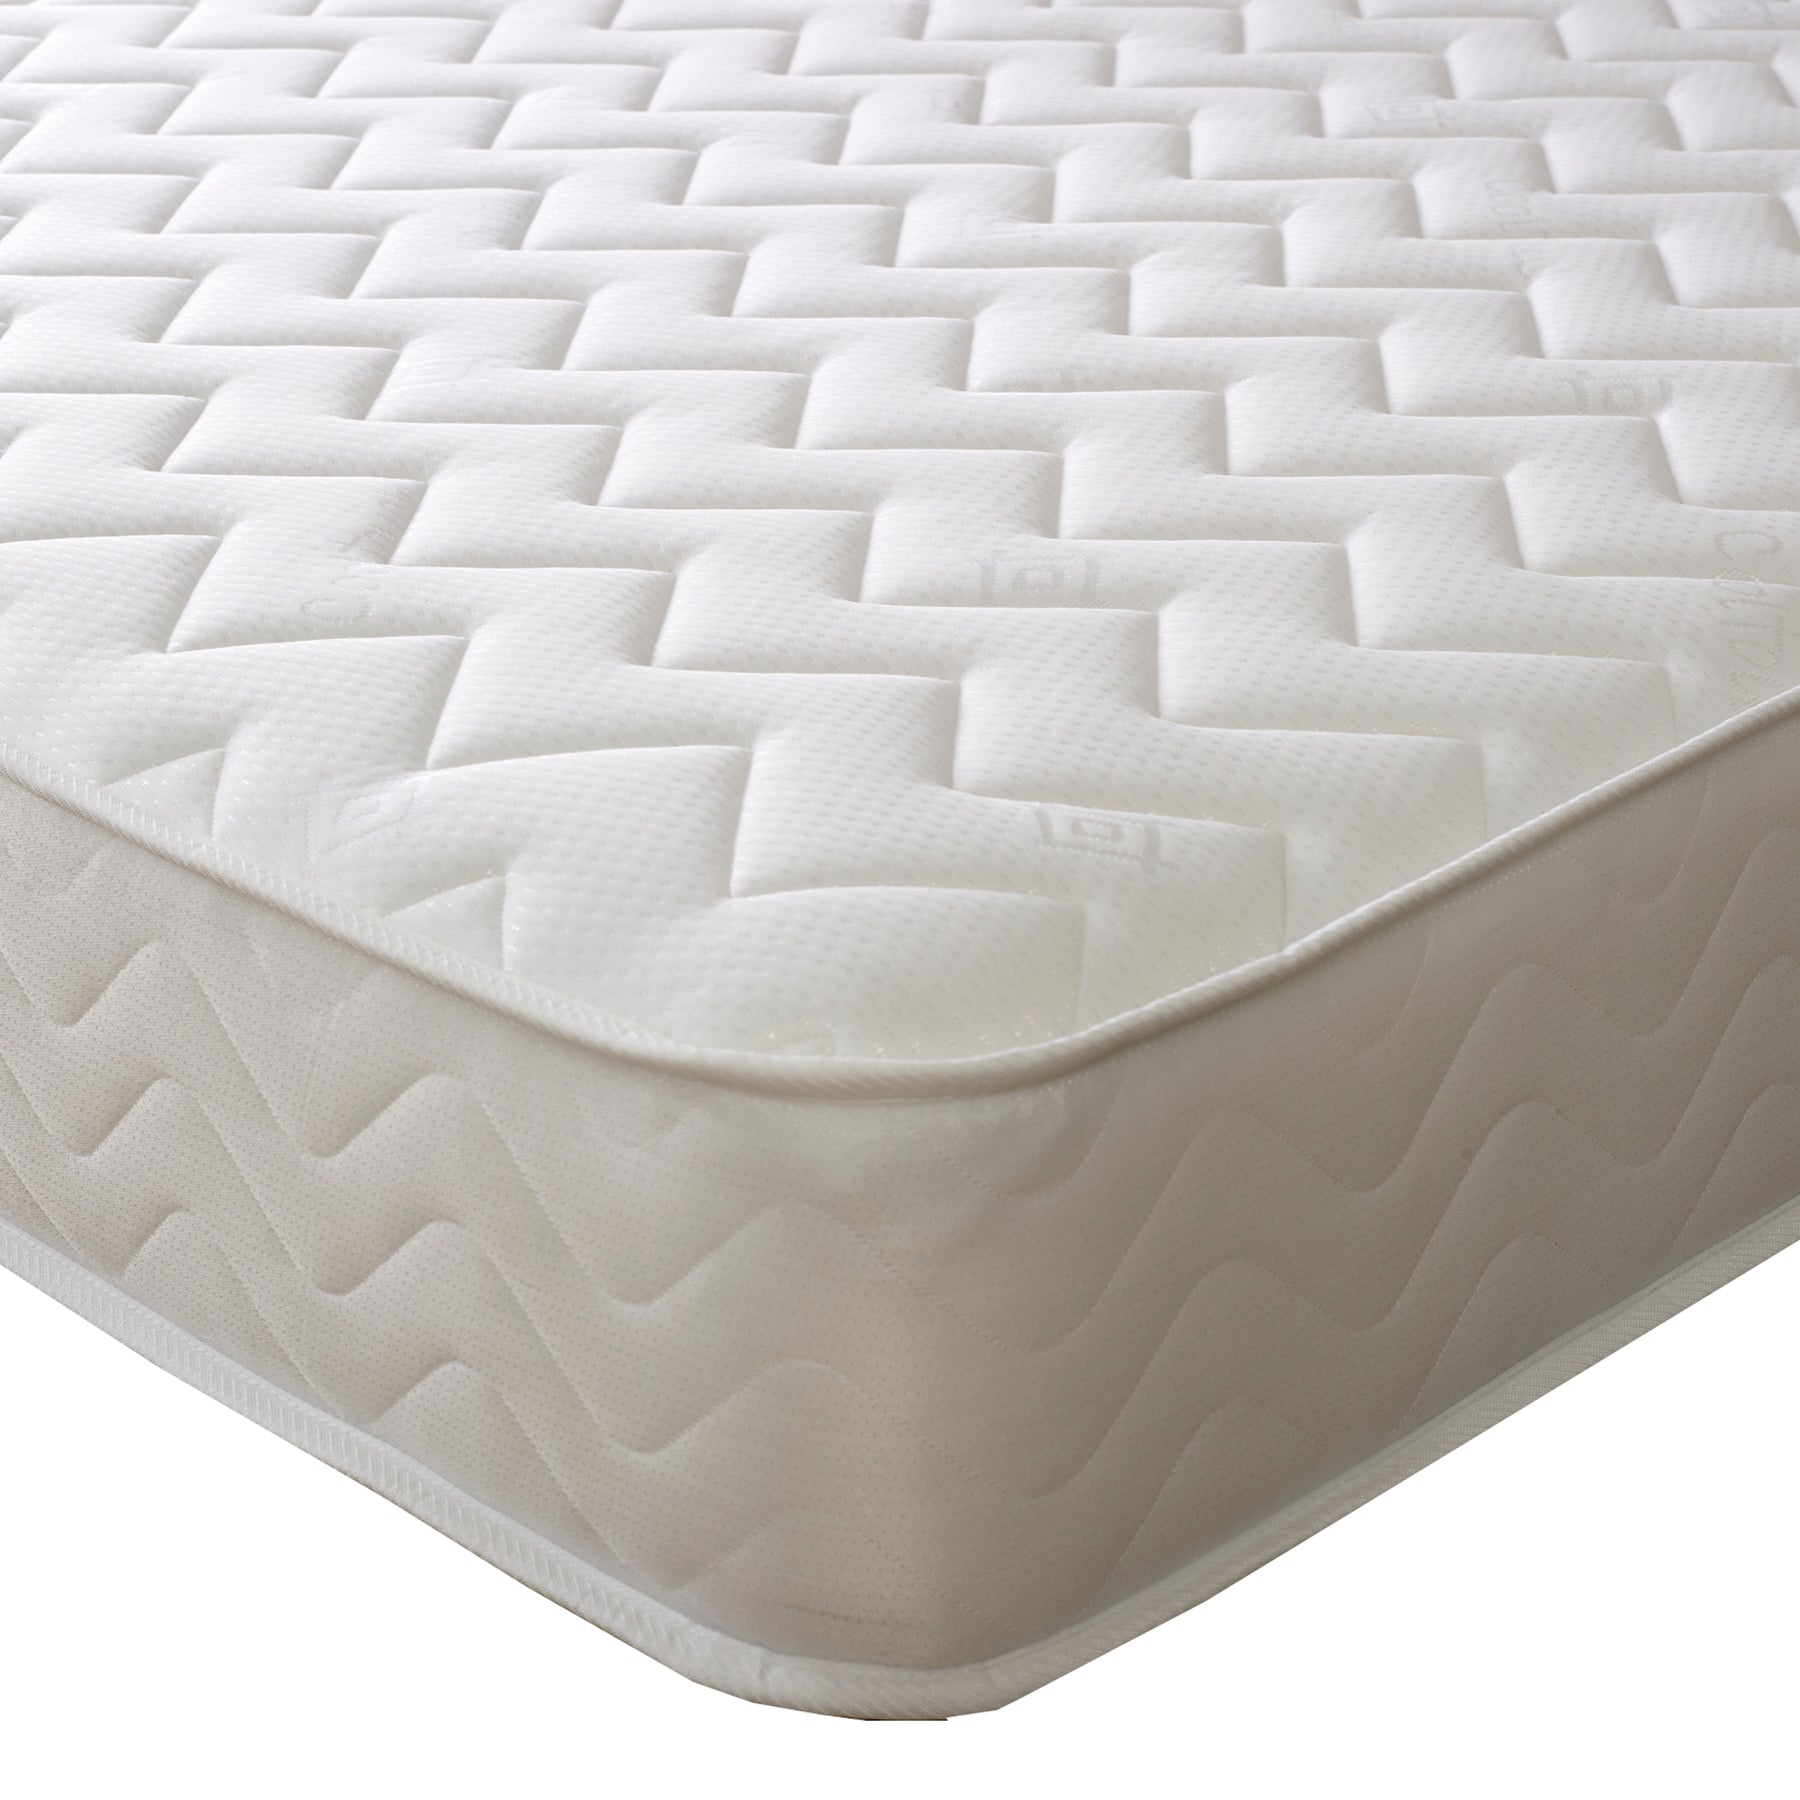 Starlight Beds™ Hybrid Spring & Memory Foam Mattress with a White Zig Zag Cool Touch Cover